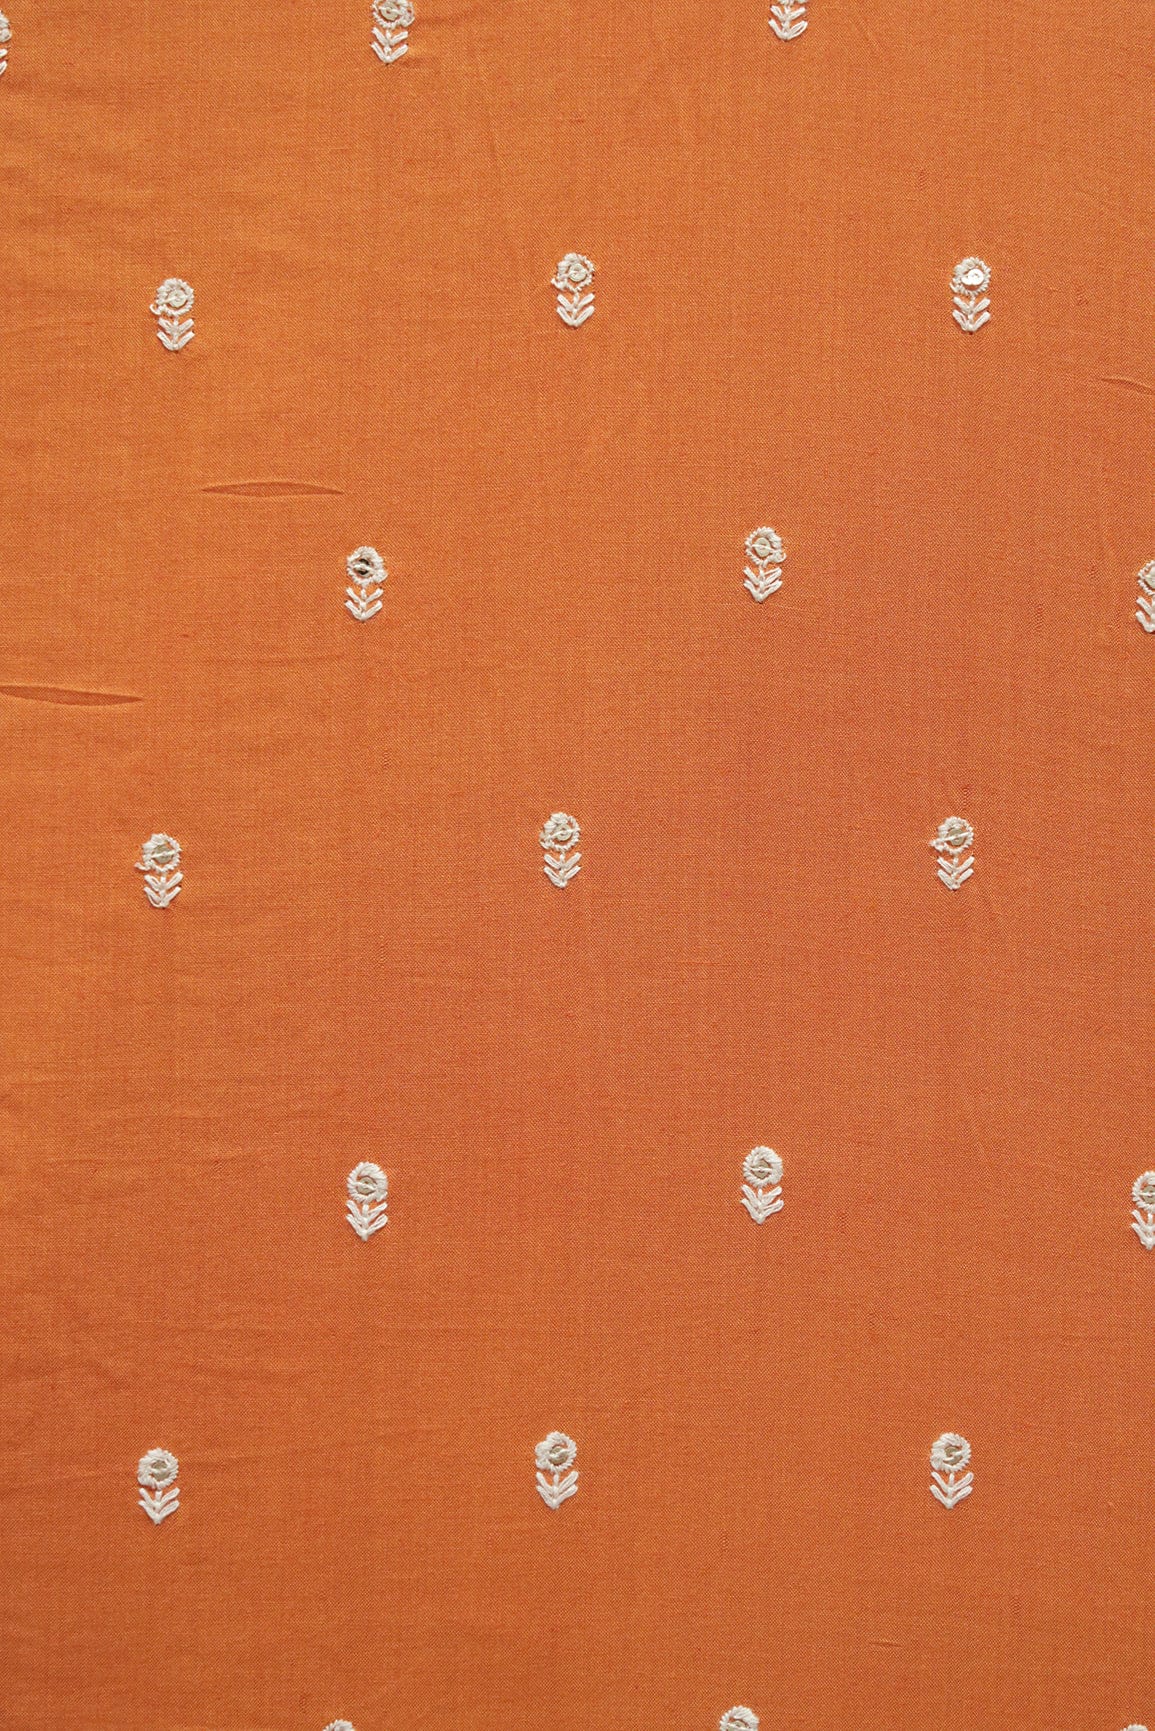 doeraa Embroidery Fabrics White Thread With Sequins Small Floral Motif Embroidery Work On Orange Muslin Fabric